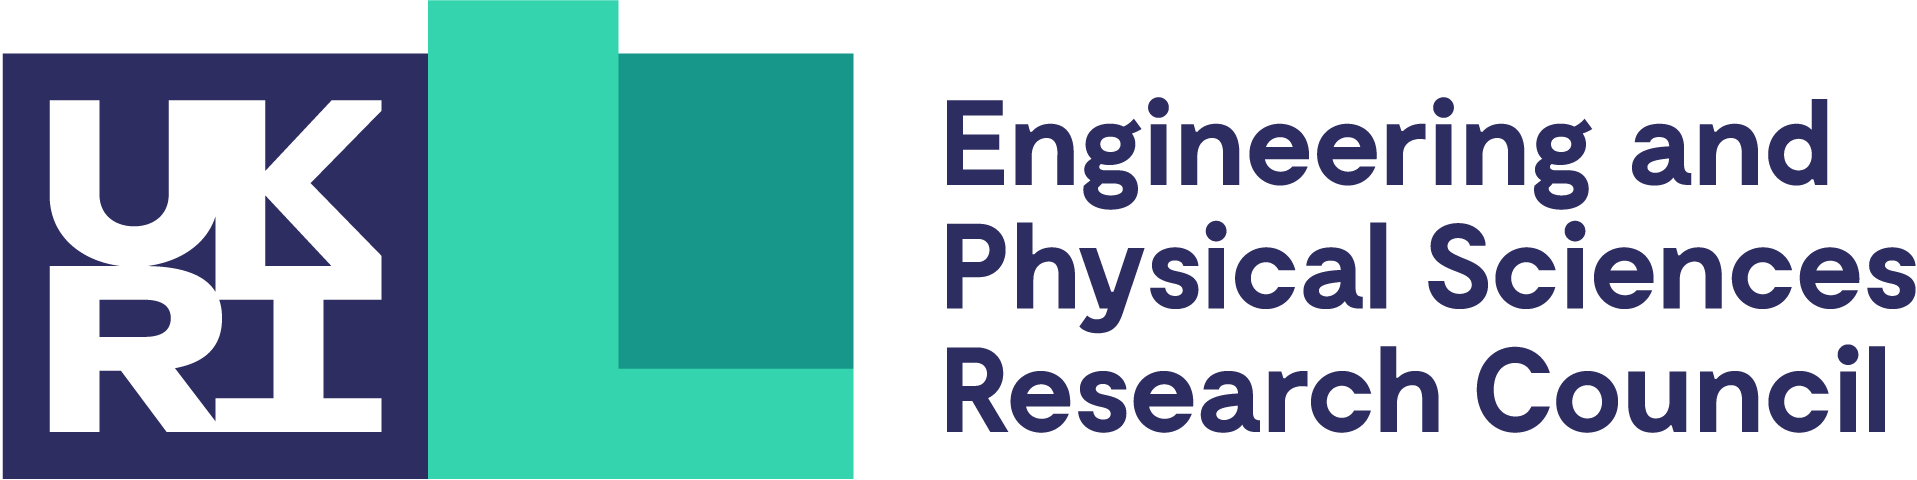 Engineering and Physical Sciences Research Council (EPSRC)